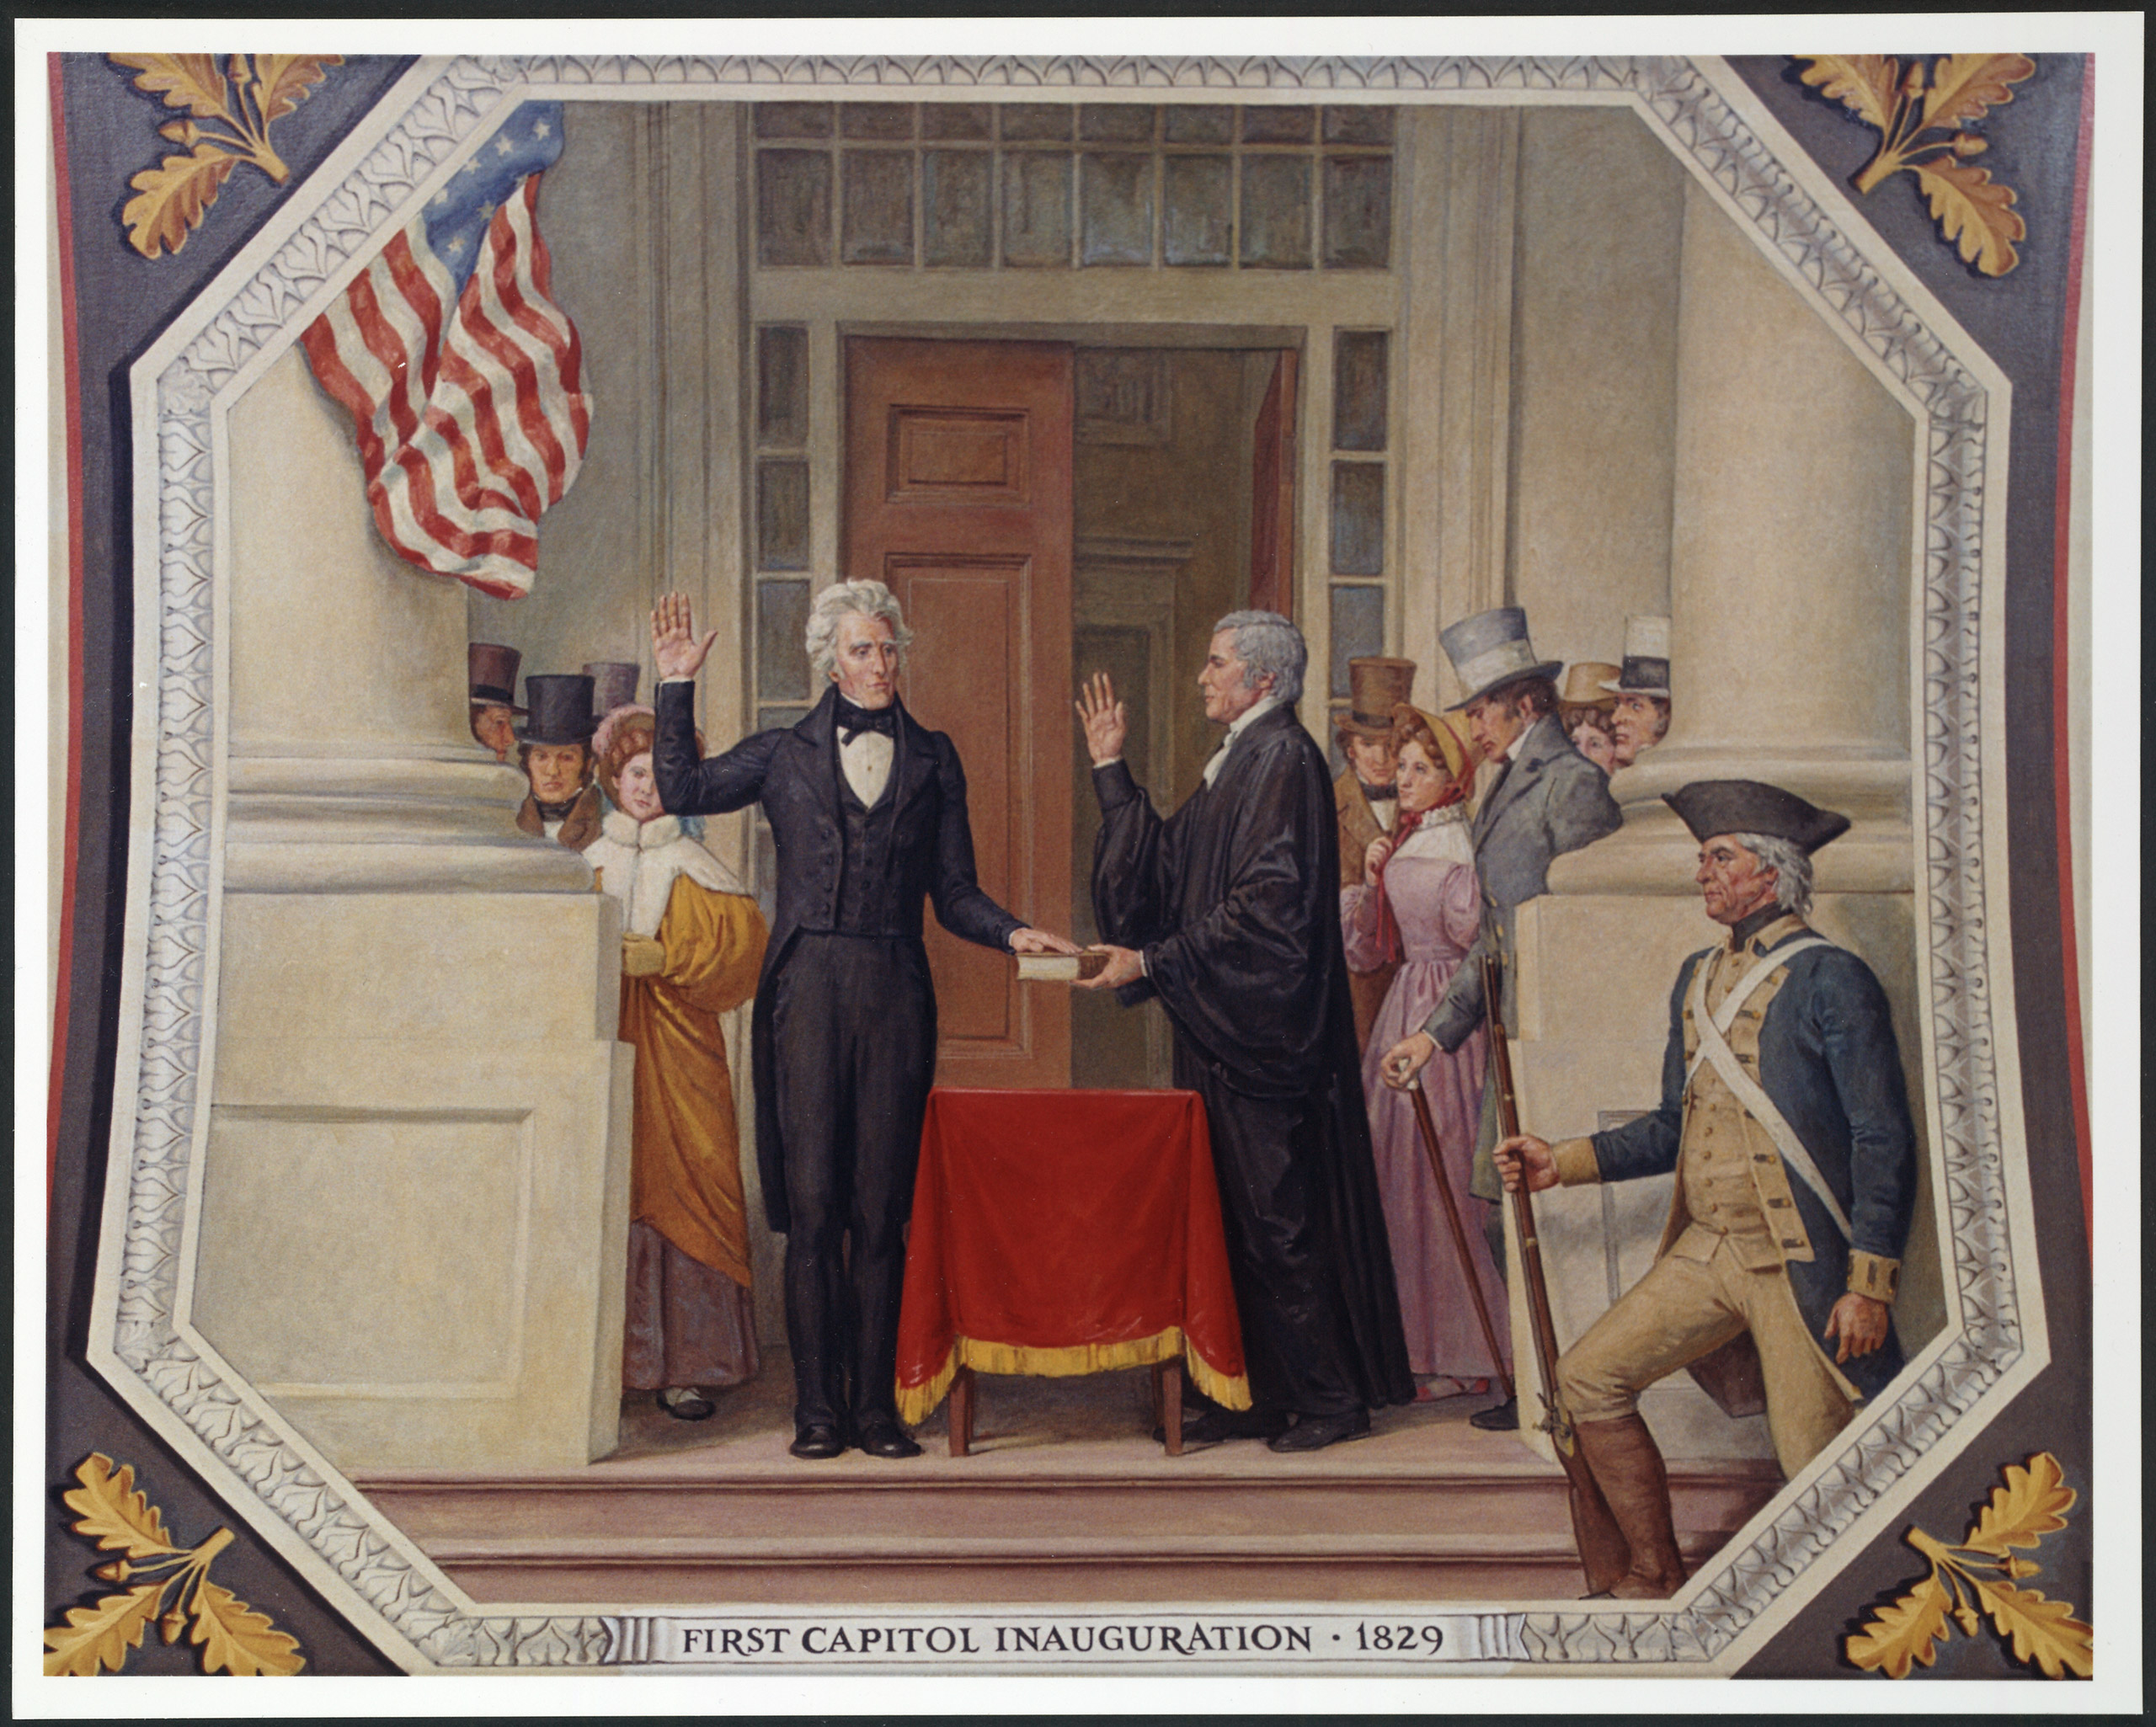 Chief Justice John Marshall administering the oath of office to Andrew Jackson on the east portico of the U.S. Capitol, March 4, 1829.